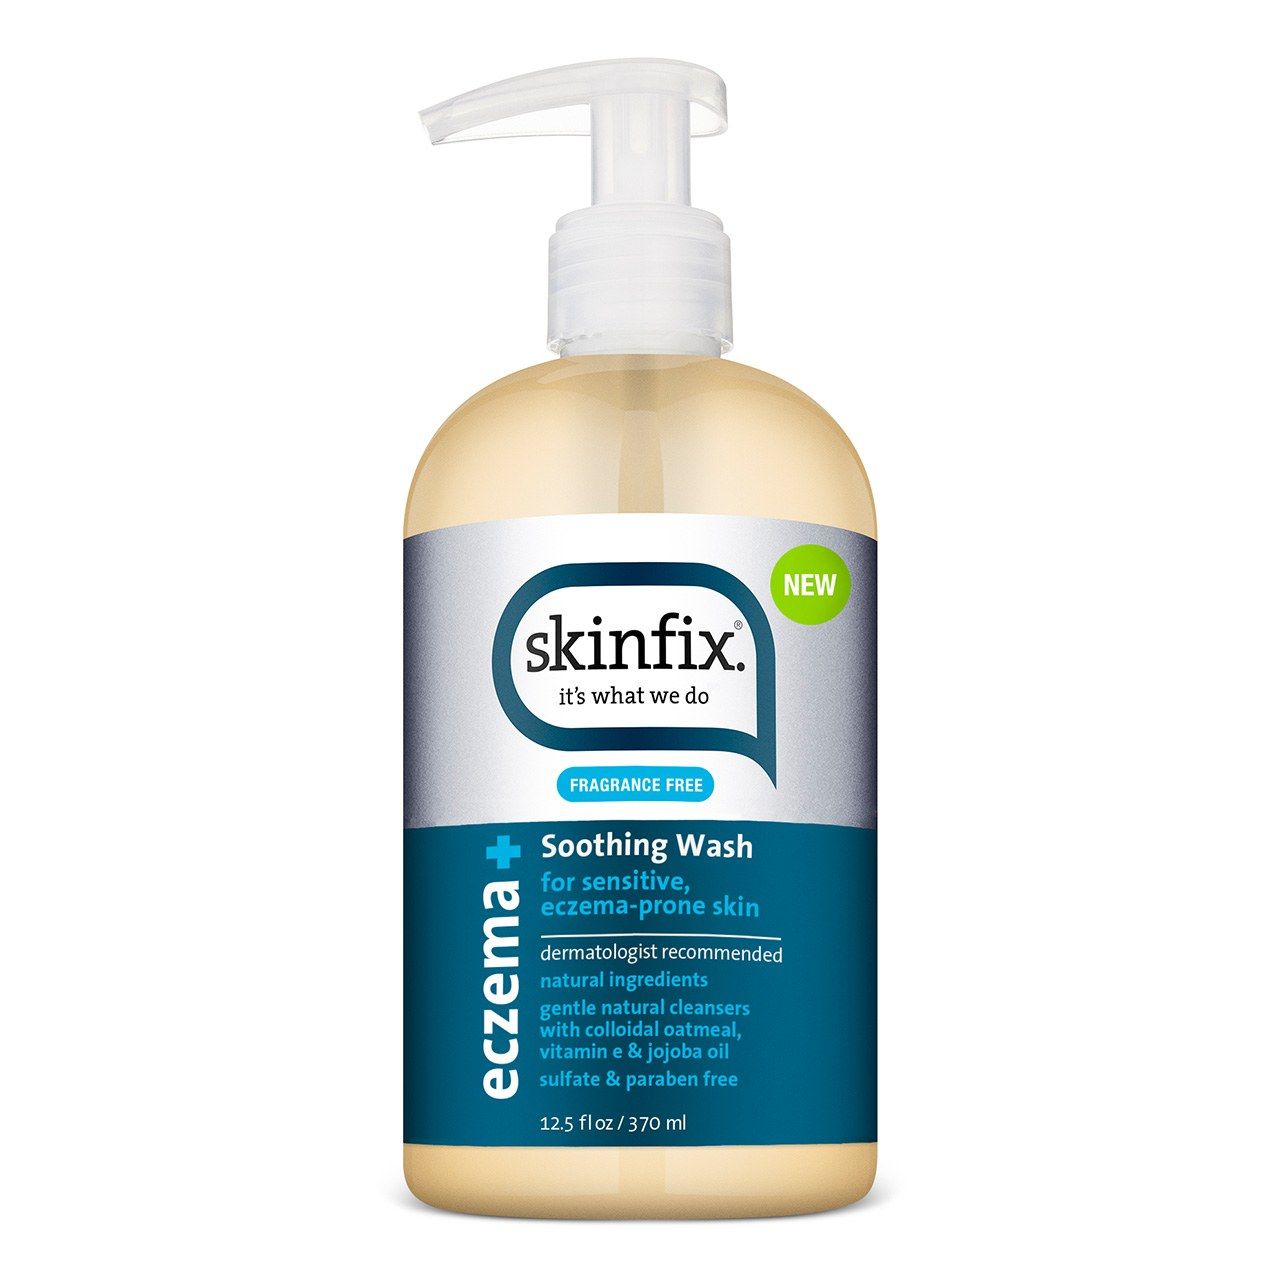 Skinfix Soothing Wash Review